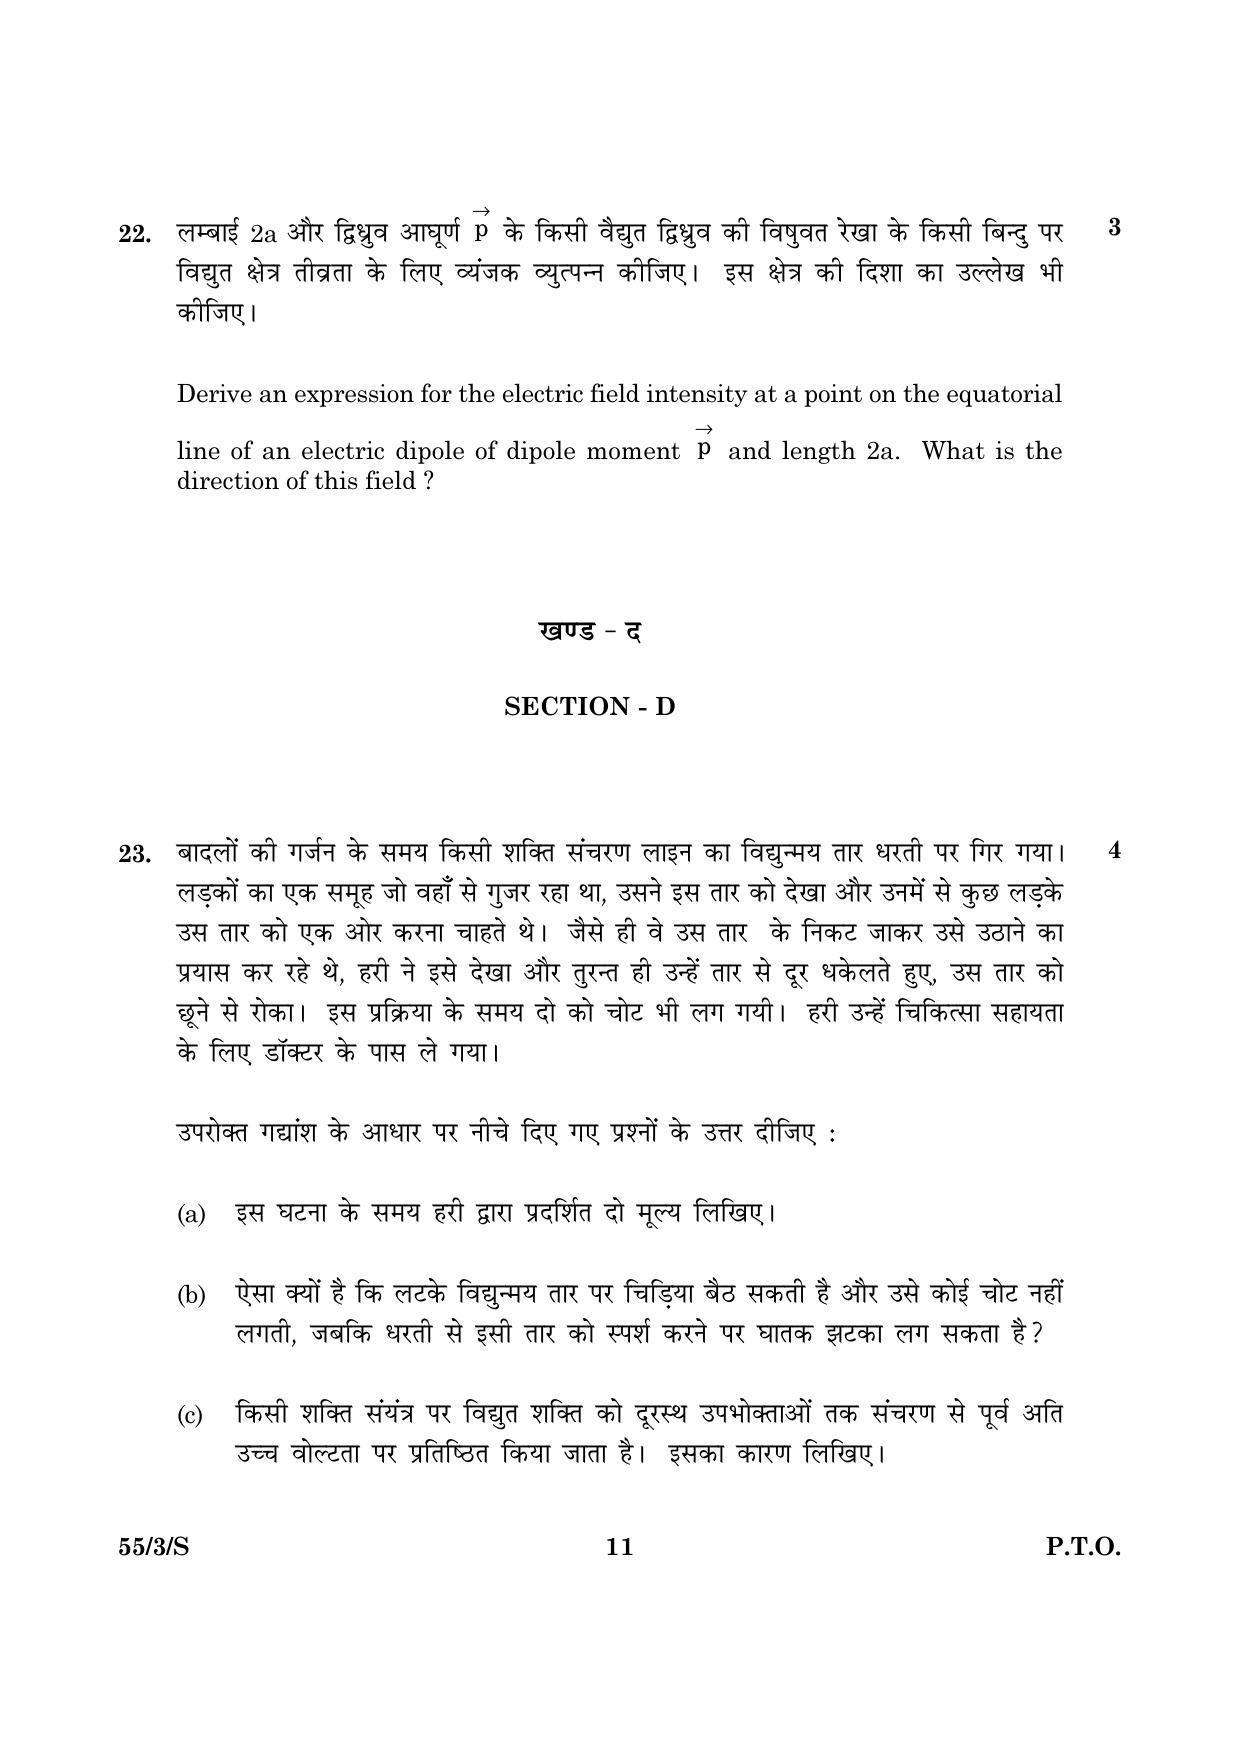 CBSE Class 12 055 Set 3 S Physics Theory 2016 Question Paper - Page 11